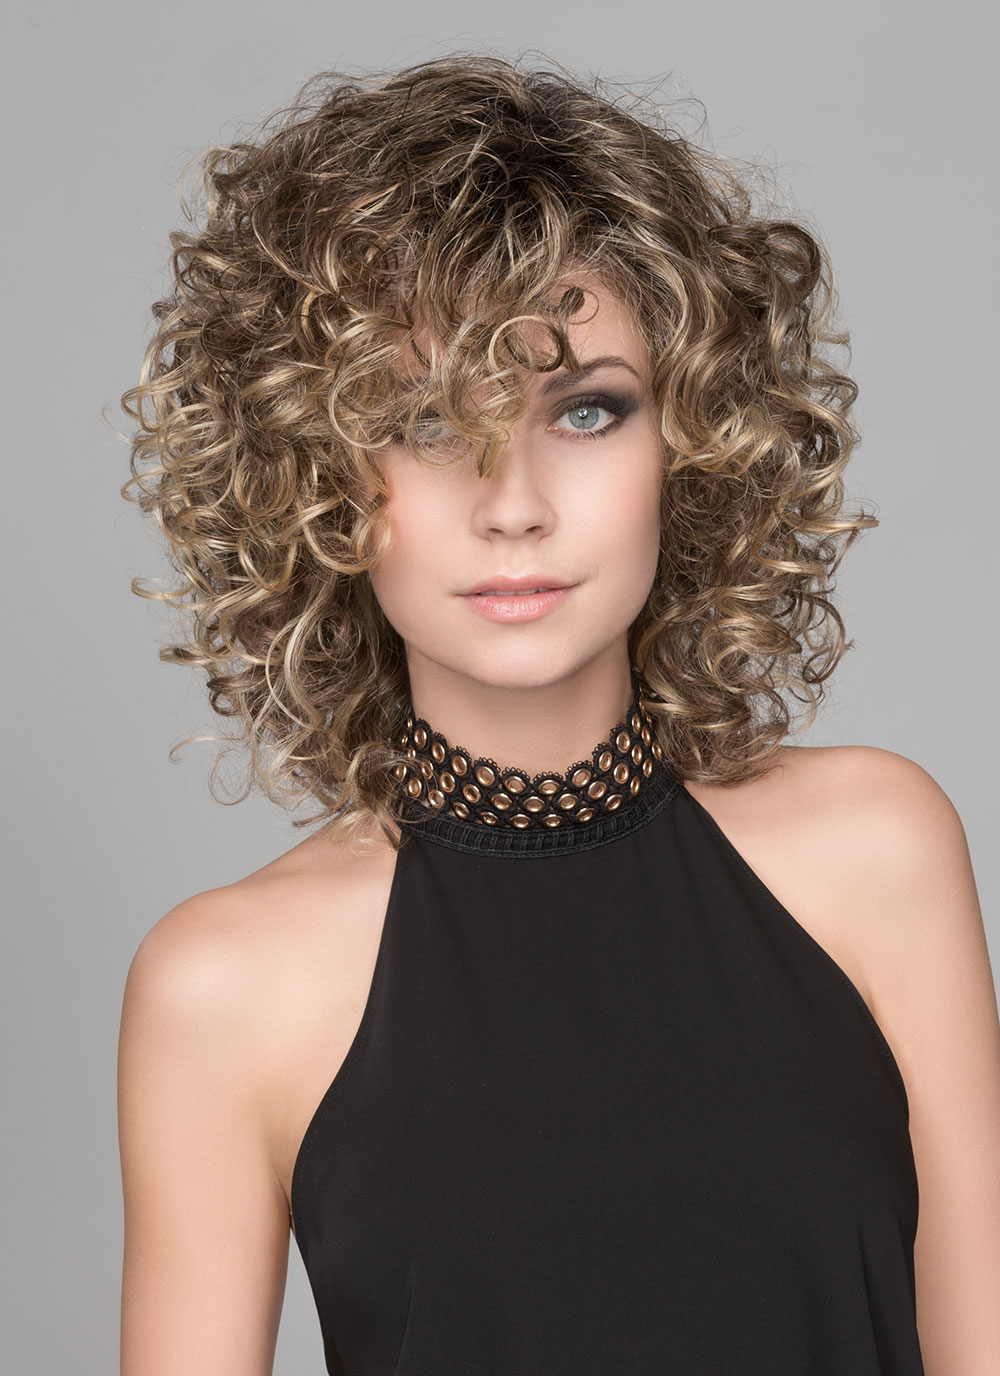 Jamila Plus by Ellen Wille Wigs is a full bodied, beautifully curled wig